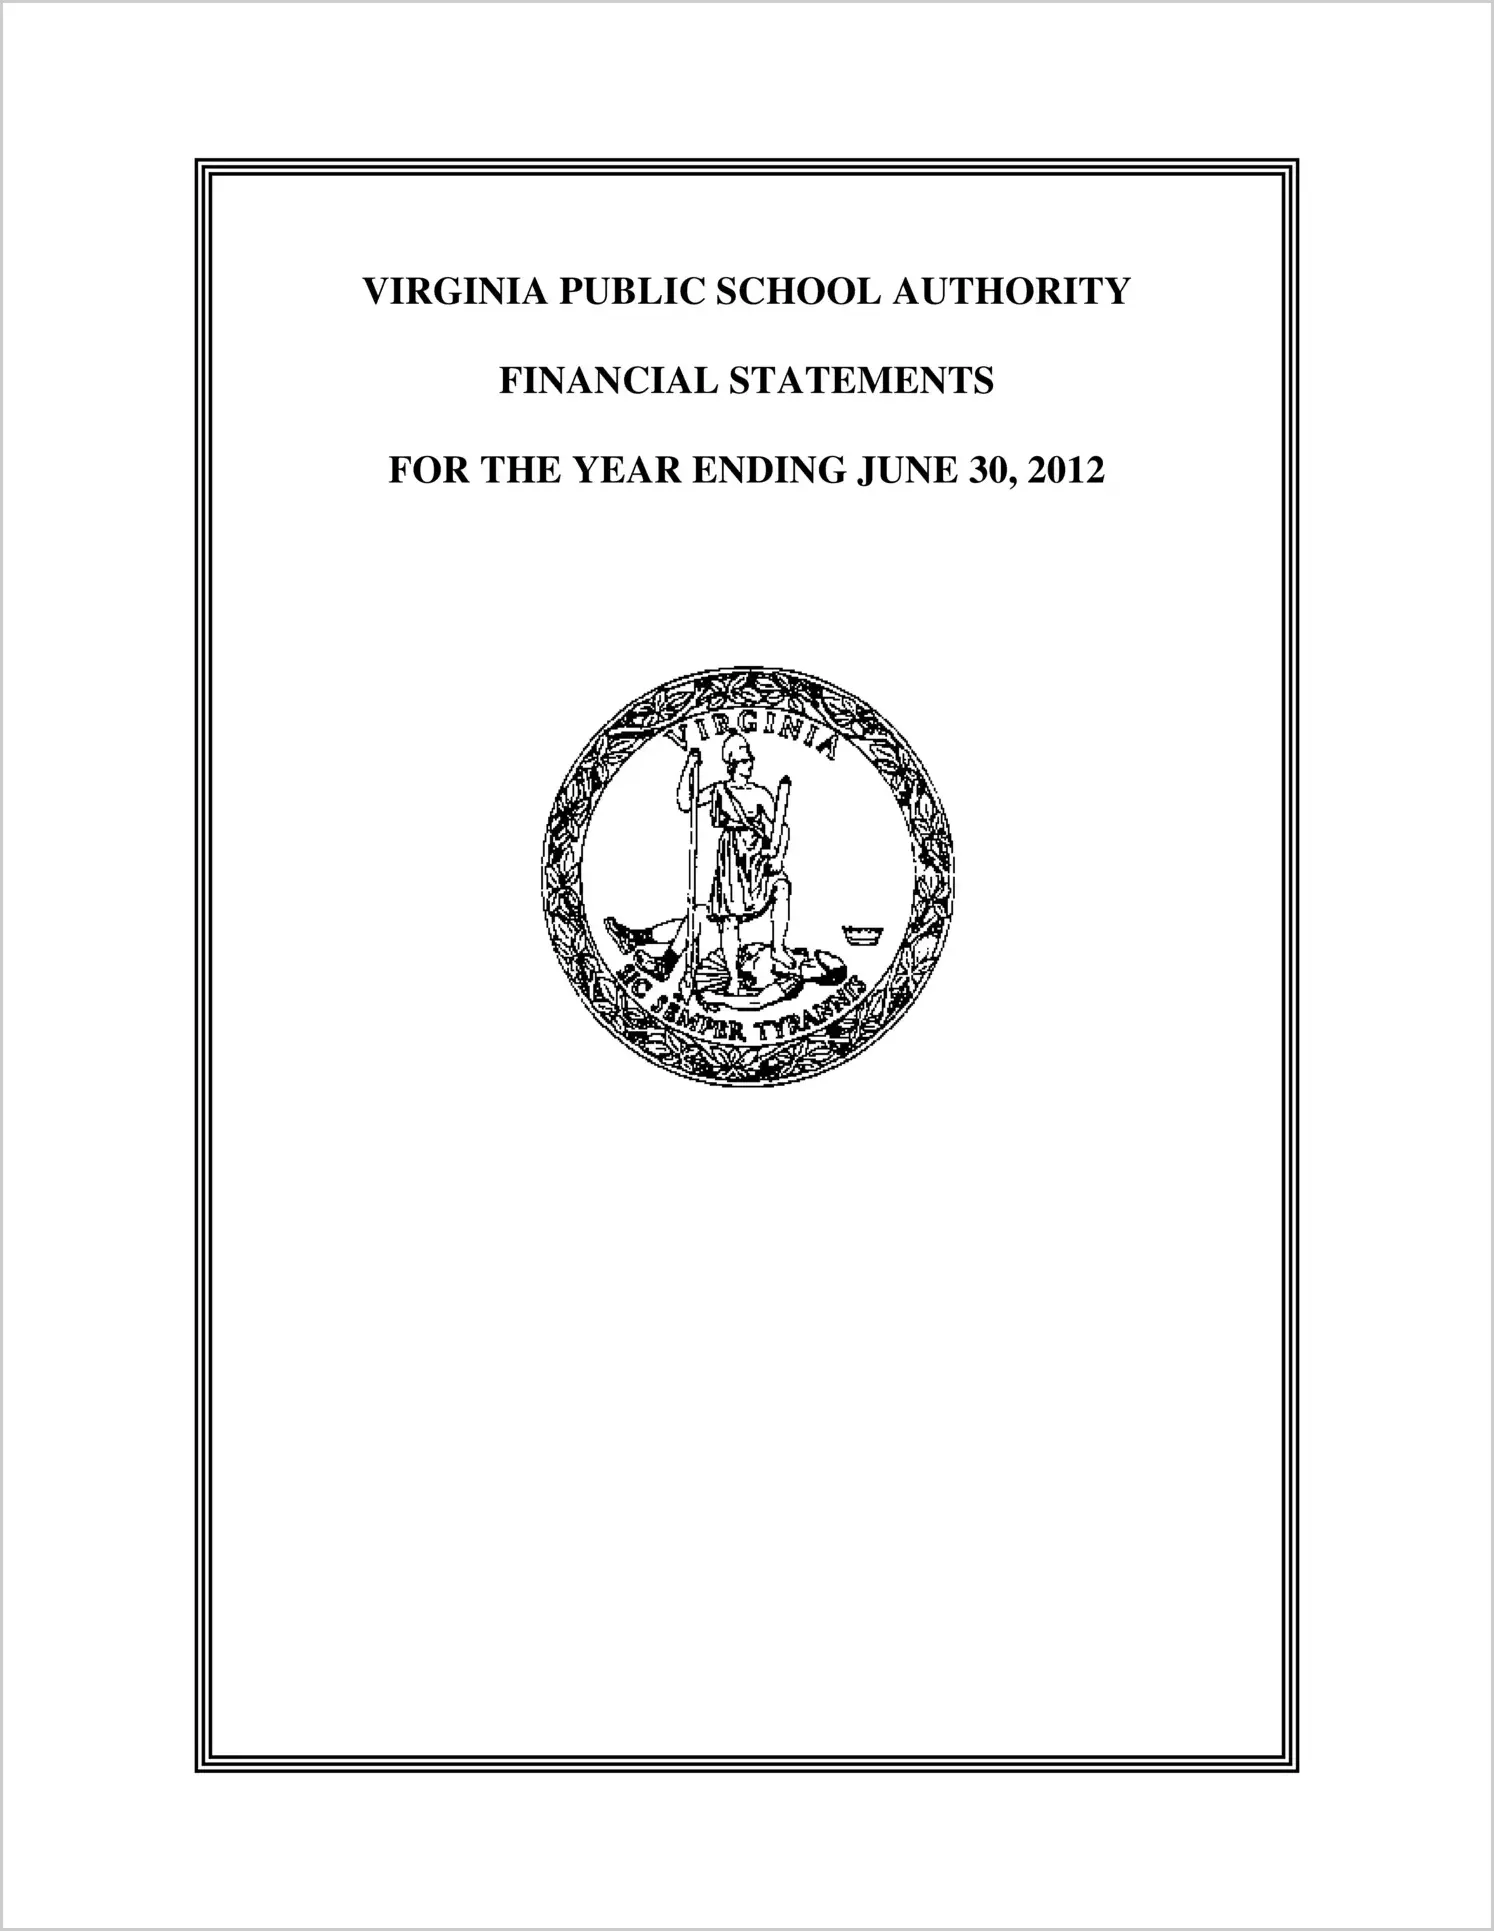 Virginia Public School Authority Financial Statements for the year ended June 30, 2012